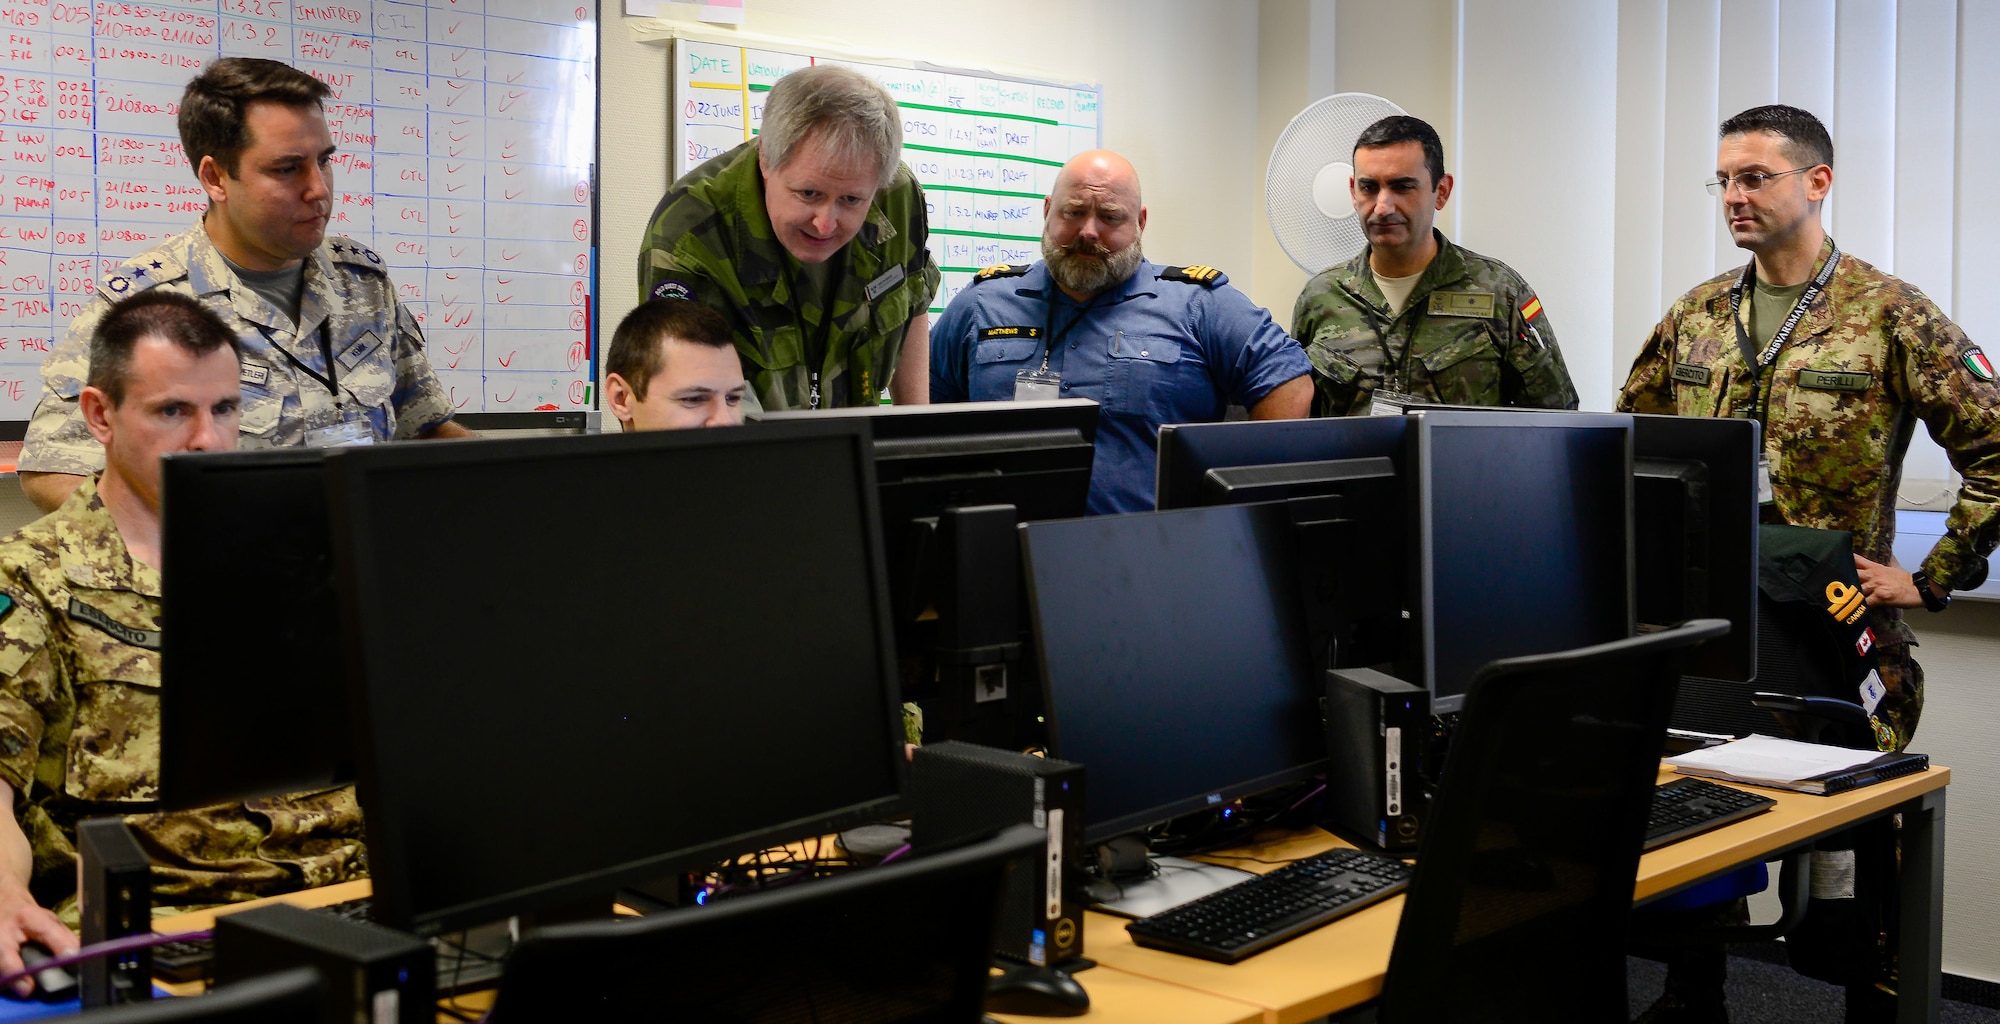 Airmen from Turkey, Croatia, Canada, Italy, Spain and Sweden analyze data together during exercise Unified Vision 2023 at Ramstein Air Base, Germany, June 22, 2023. Exercises like UV 23 provide an opportunity for NATO forces to familiarize themselves with other nations’ practices in order to continue delivering air and space power for the alliance.